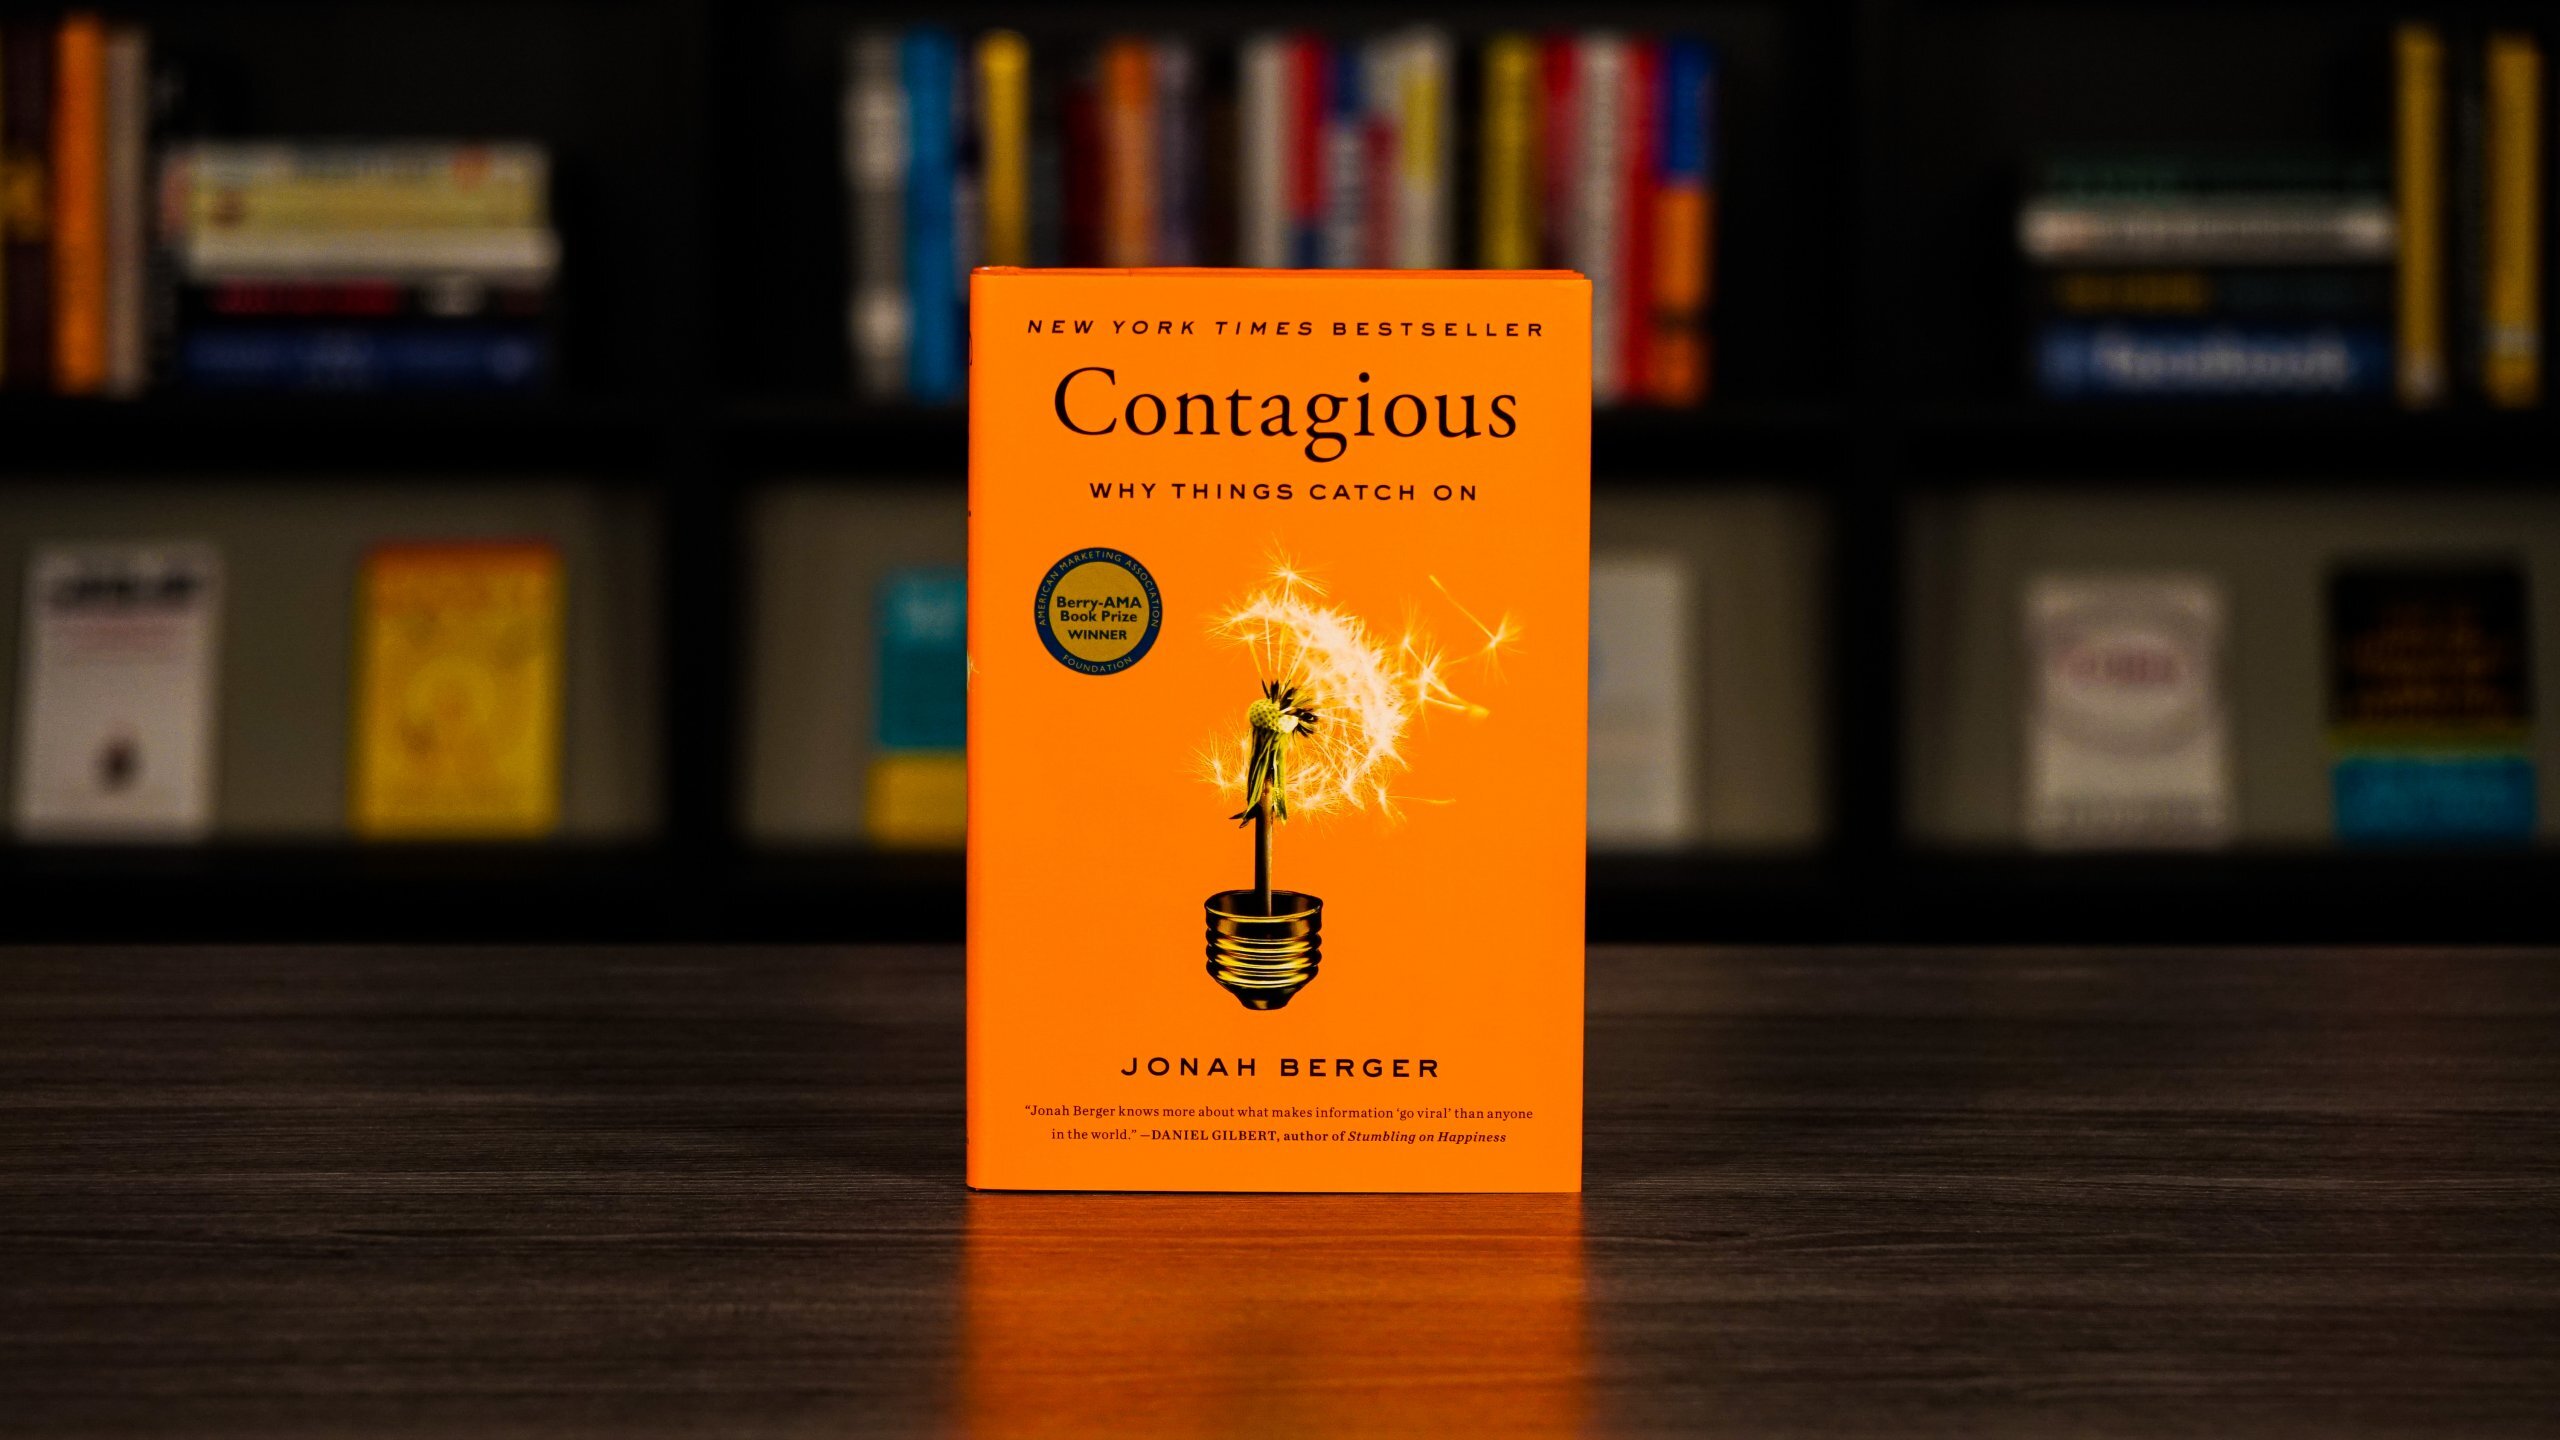 A book by Jonah Berger titled Contagious.